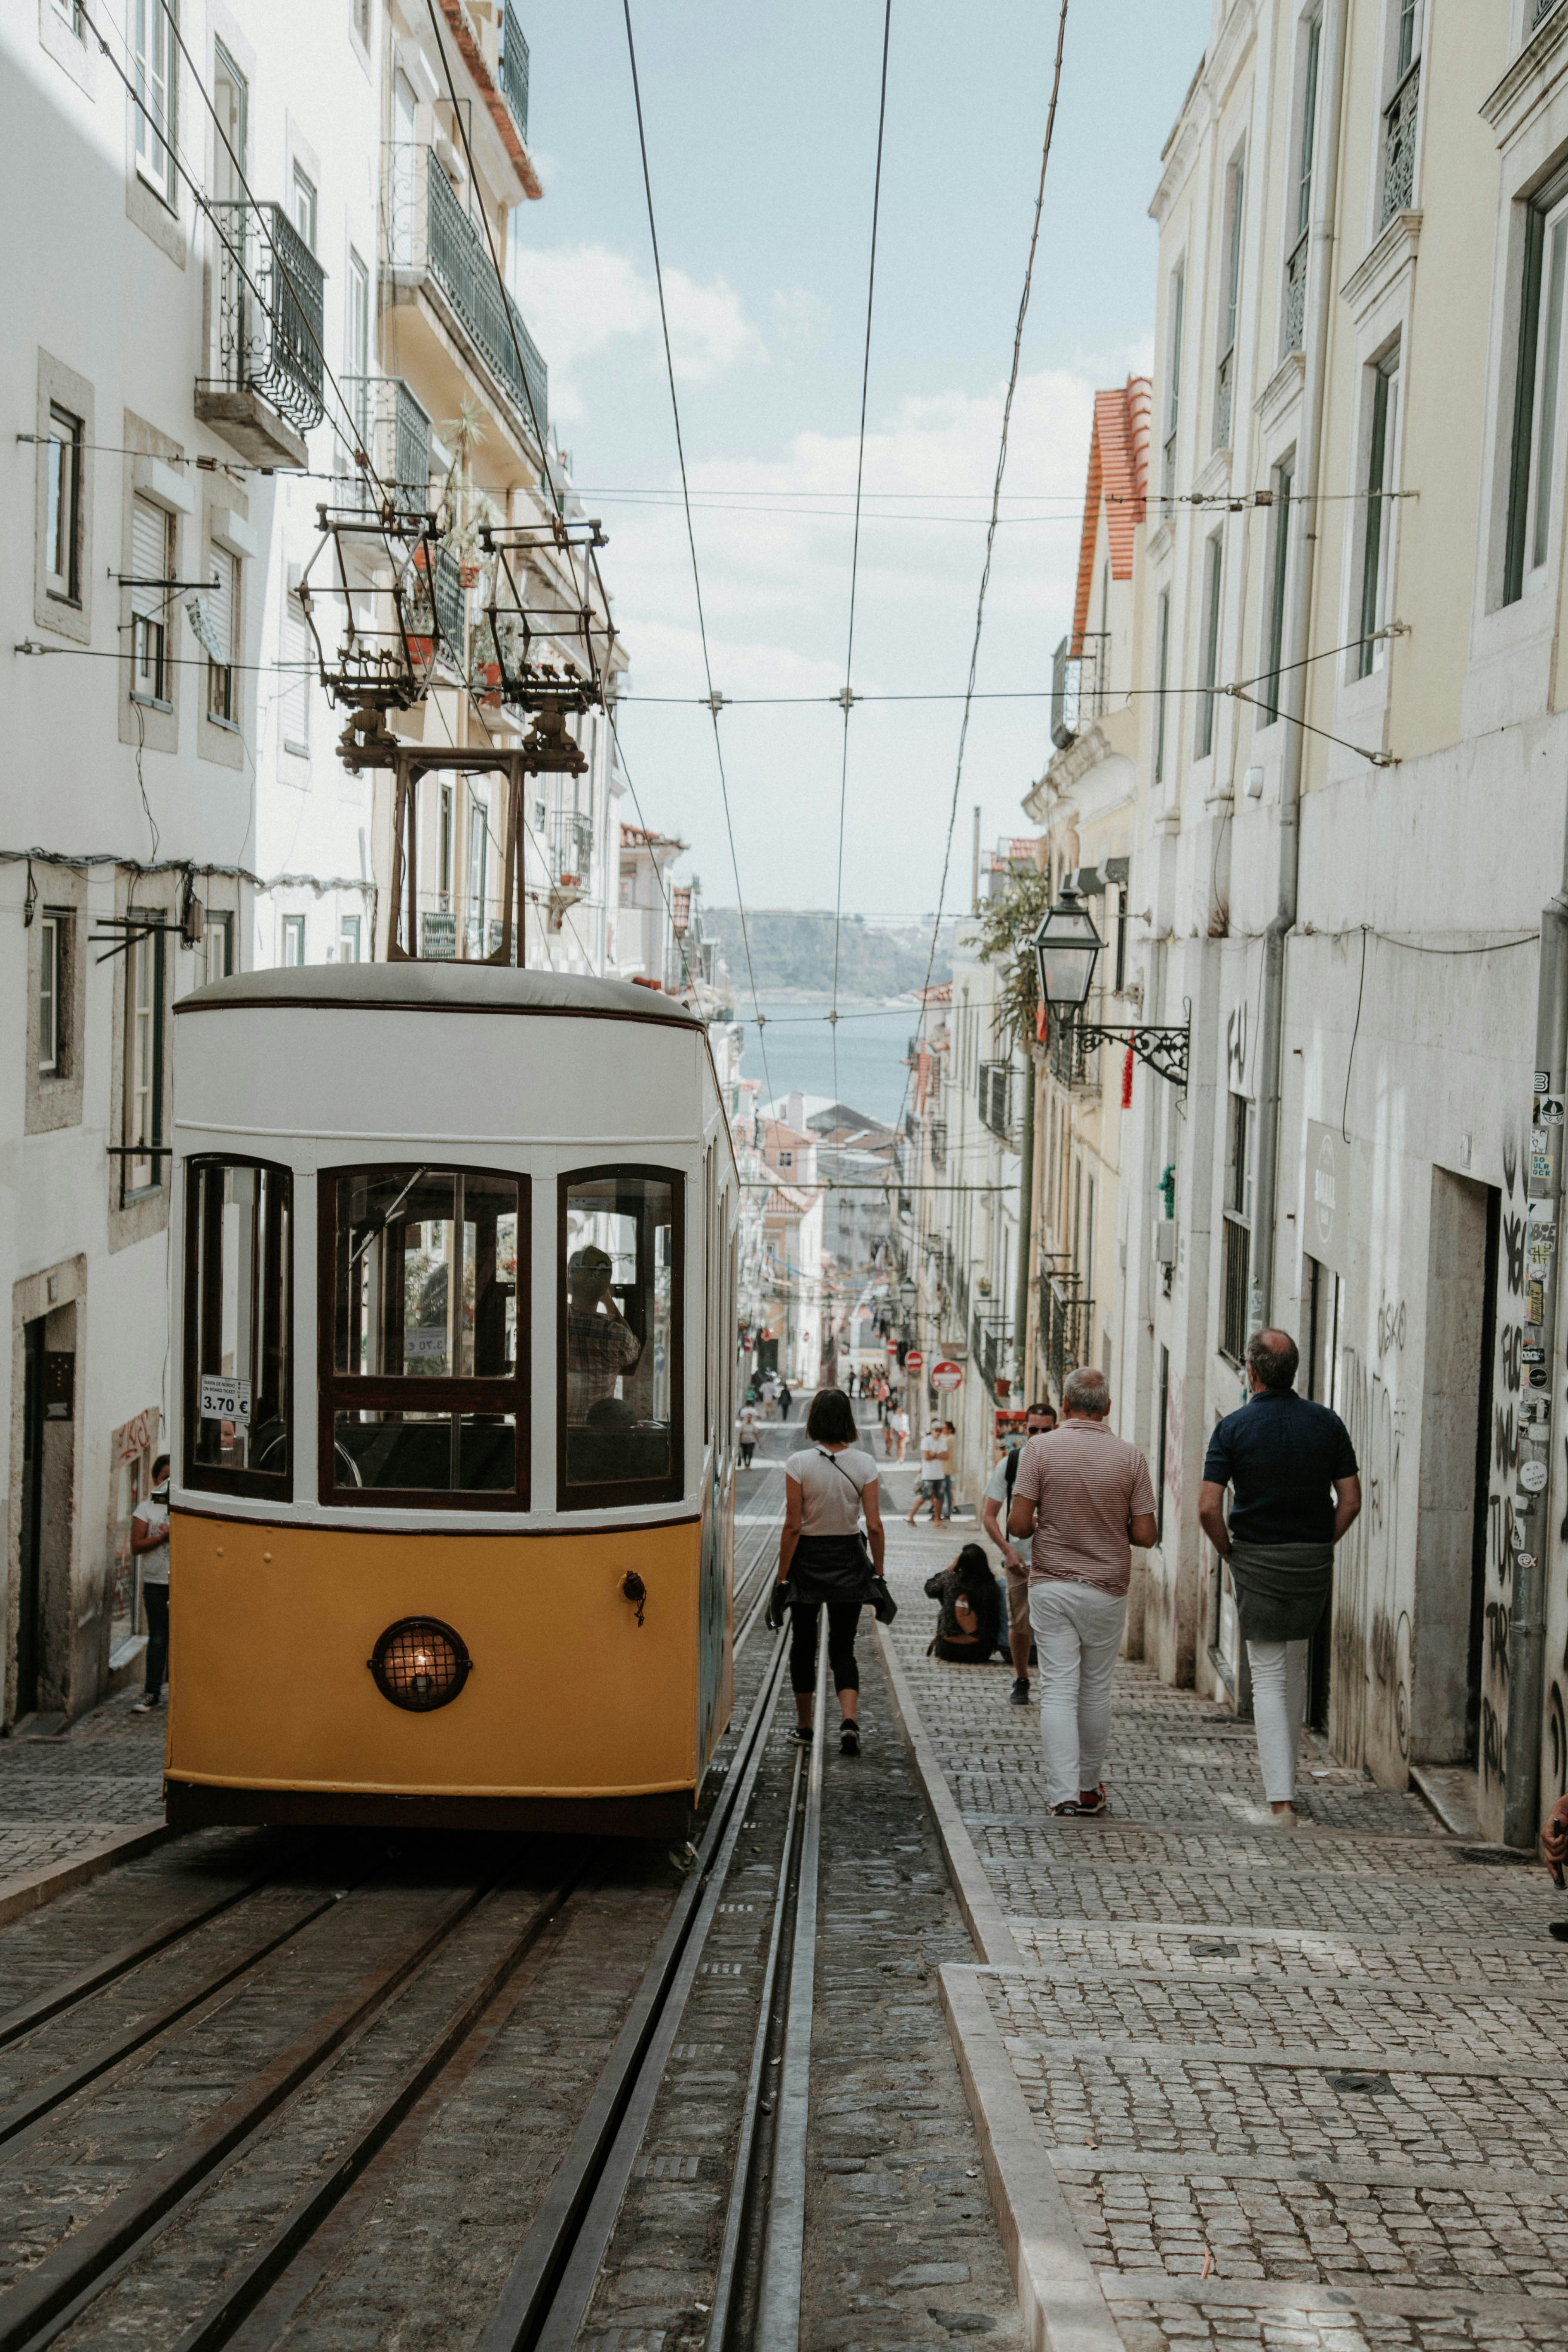 there is something so mesmerizing about Lisbon and its trams. maybe its the screech as it passes you by and turns down a new street or the smiles and awestruck faces of its passengers. whatever it is, I’m absolutely in love.